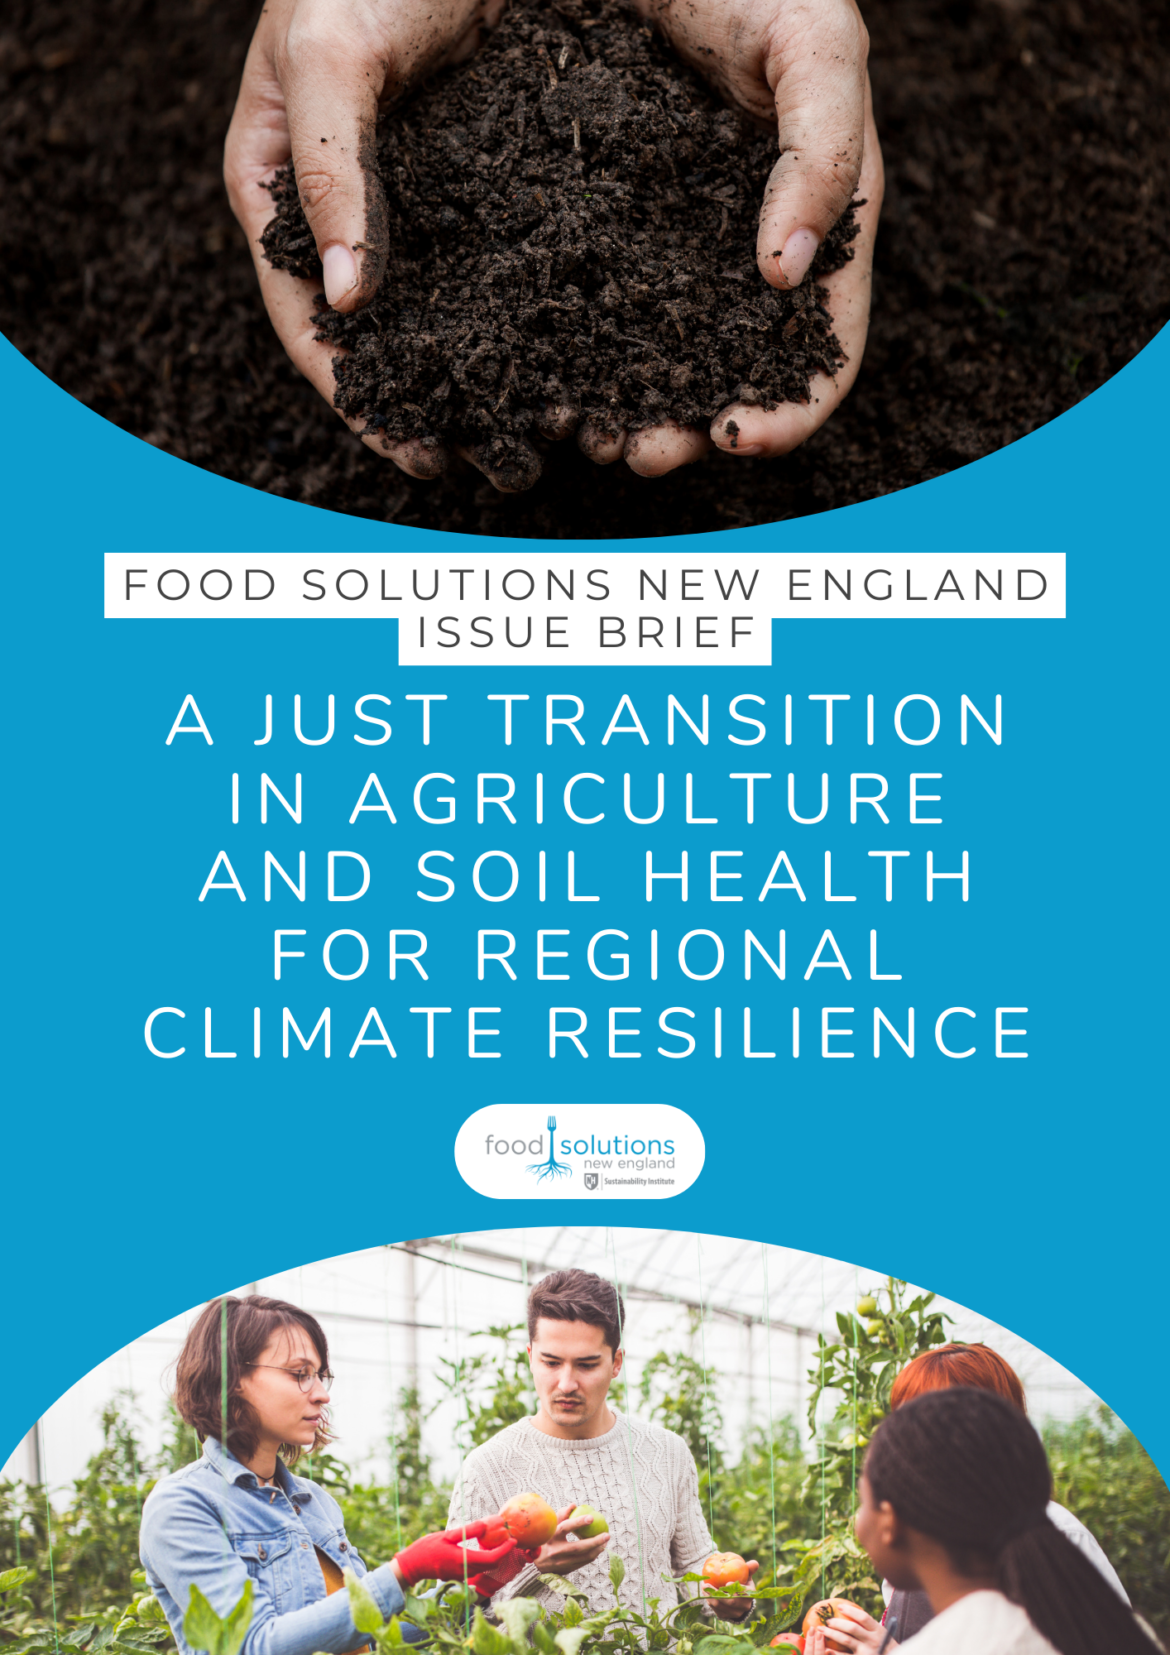 Blue background with photo up top of hands in soil and photo on bottom of people in a green house holding tomoatoes. Text reads "Food Solutions New England Issue Brief. A Just Transition in Agriculture and Soil Health for Regional Climate Resilience"